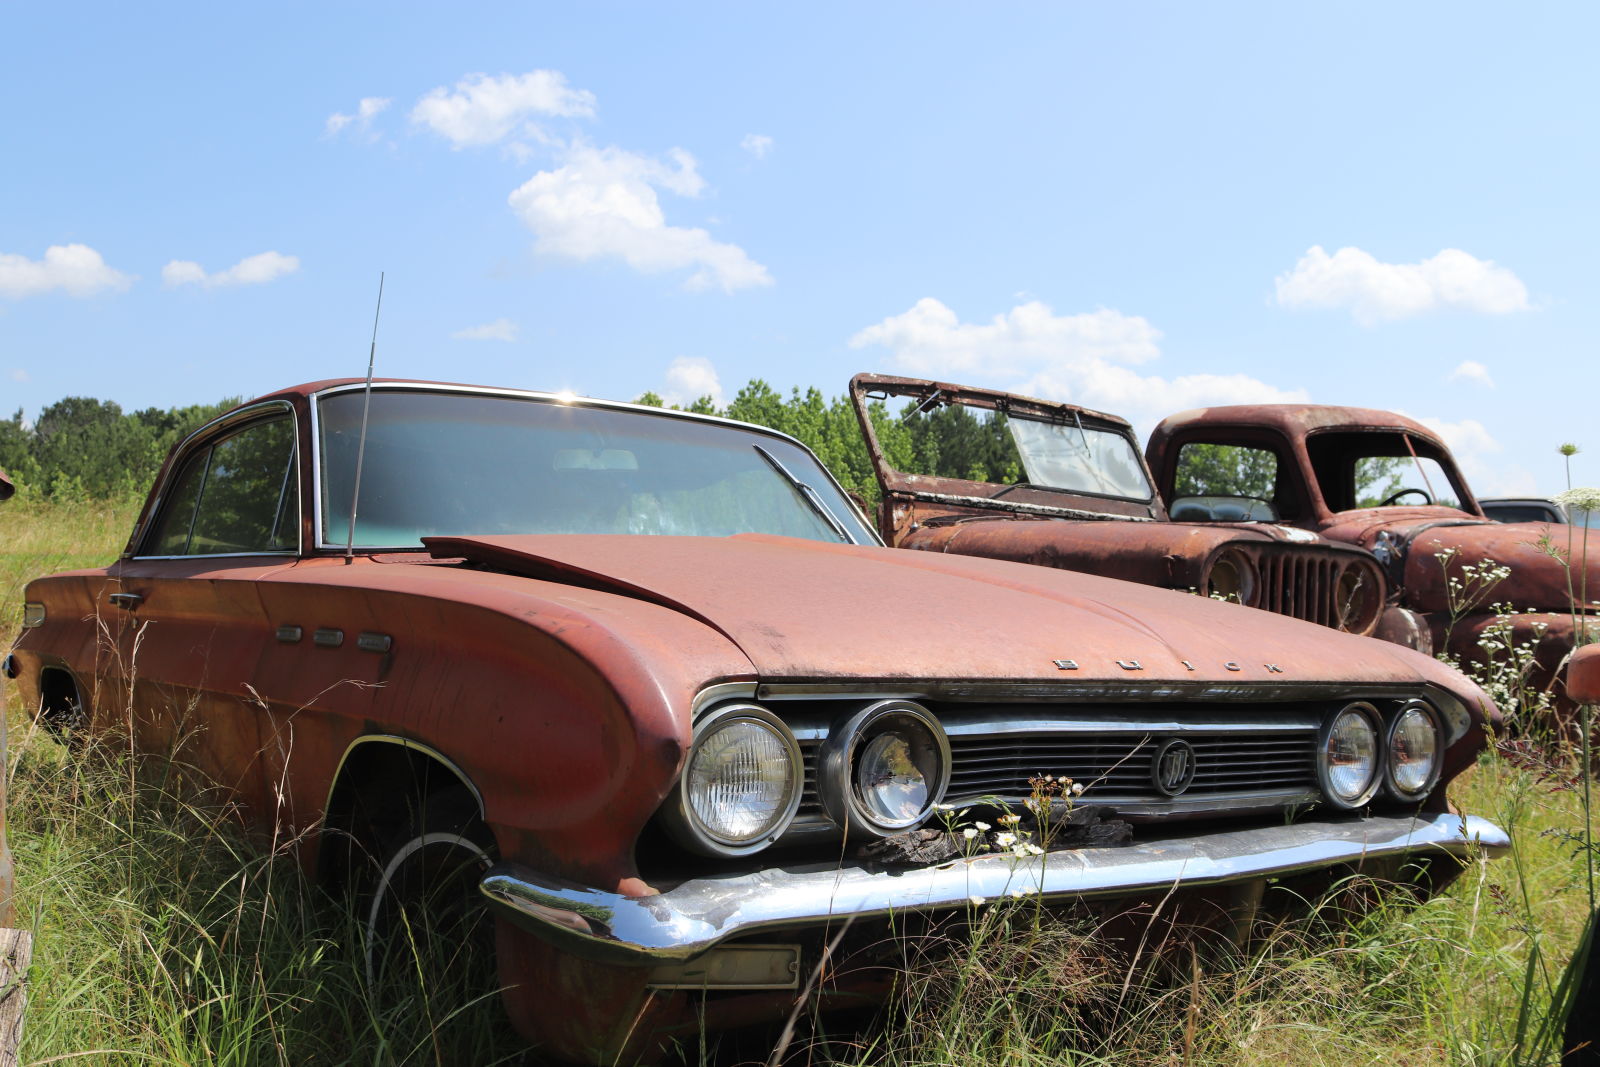 This 1962 Buick Skylark coupe was part of the hoard in the field.